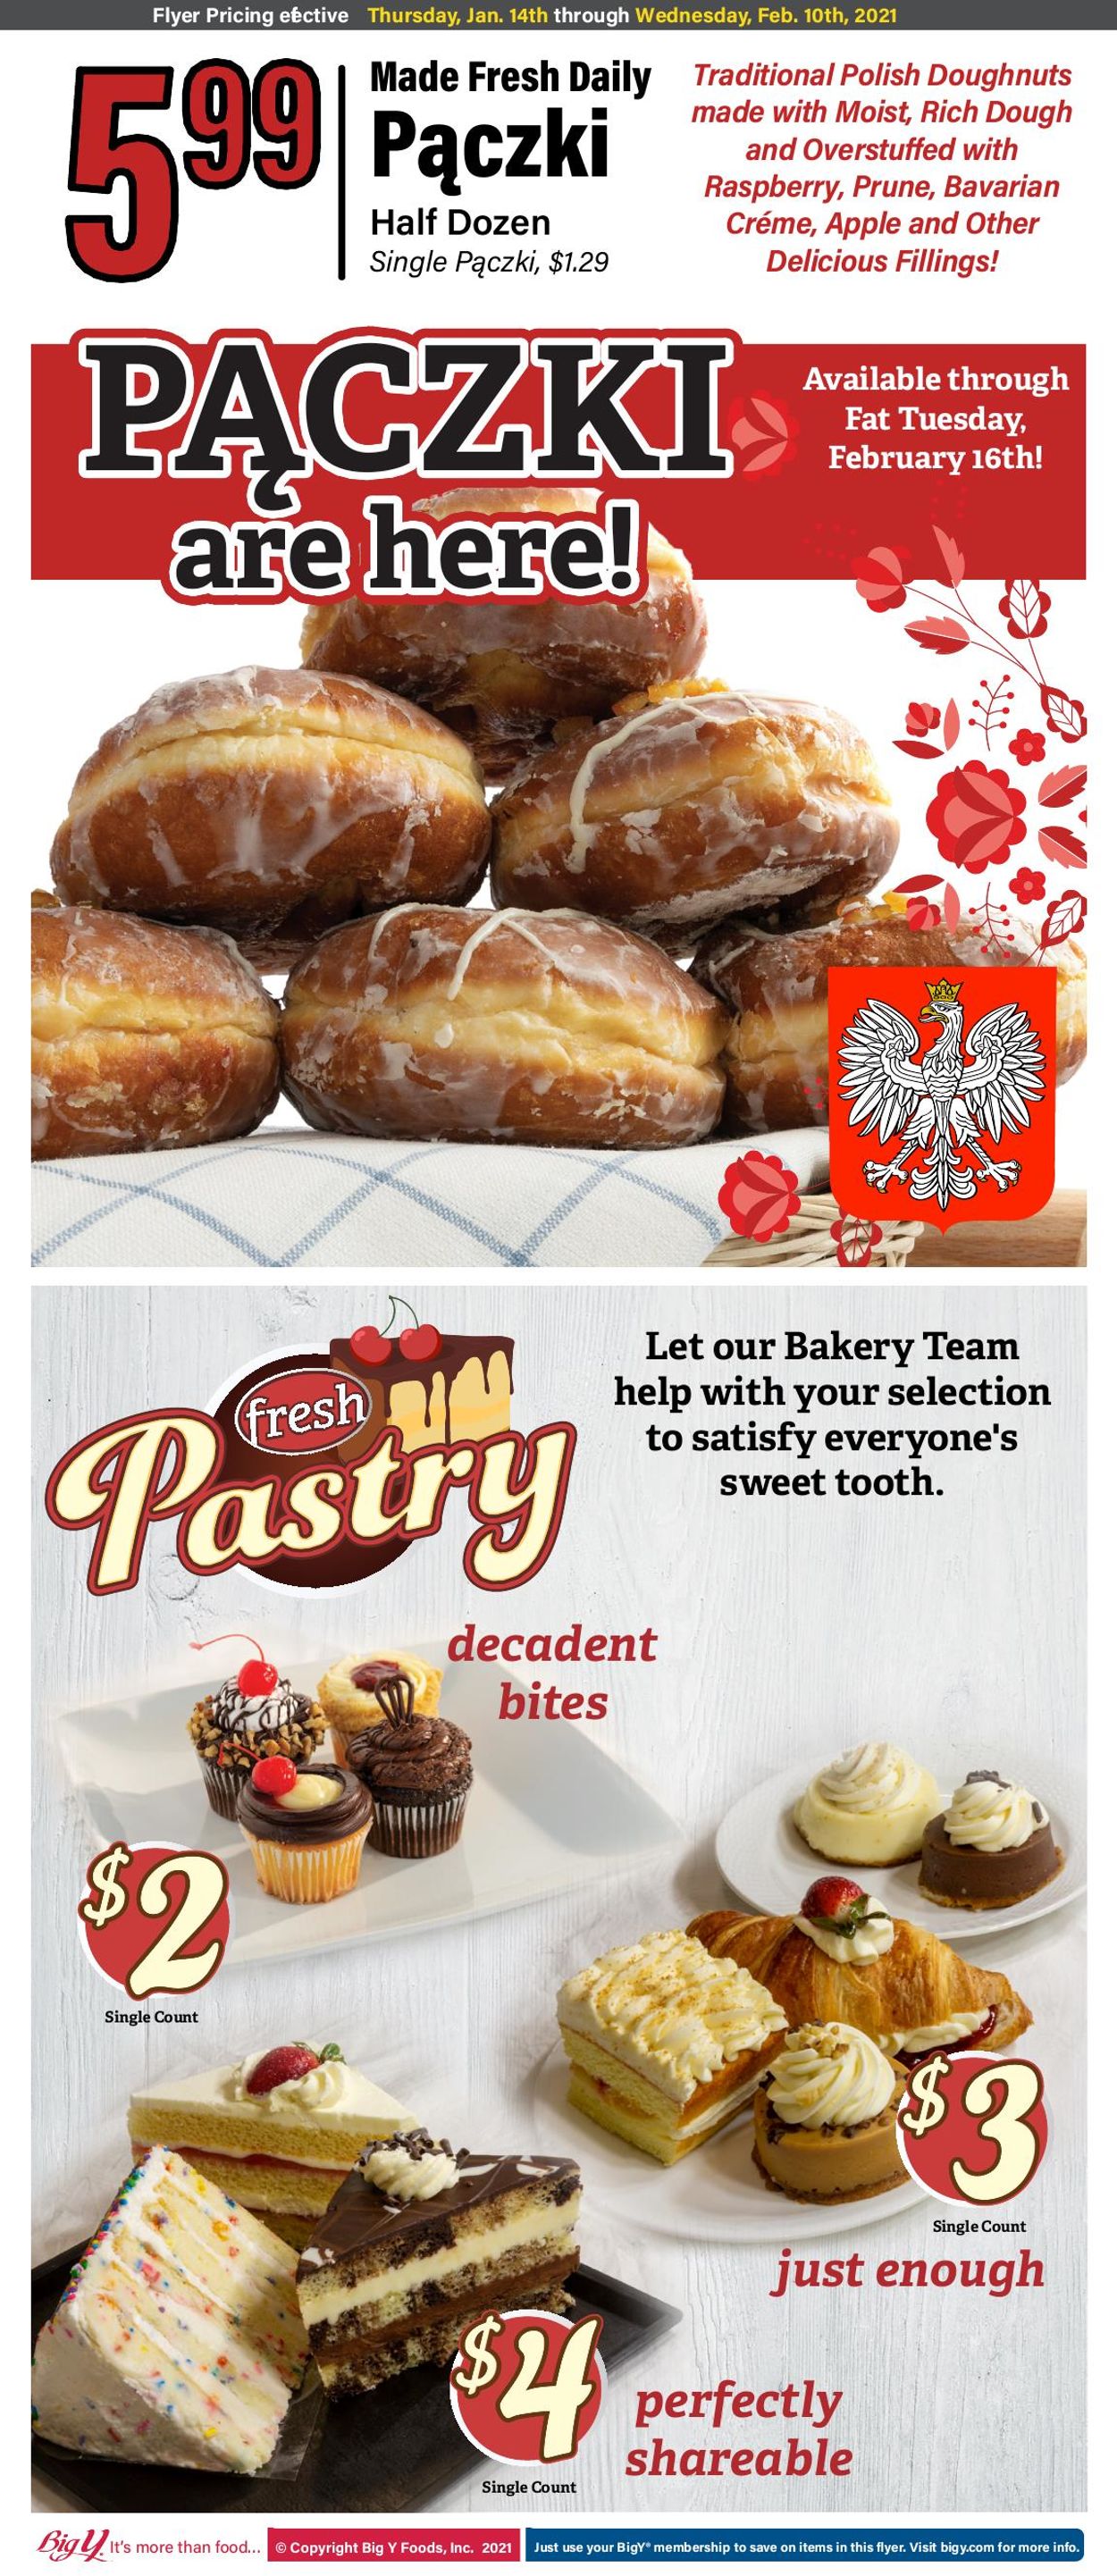 Big Y Paczki are Here 2021 Current weekly ad 01/21 02/10/2021